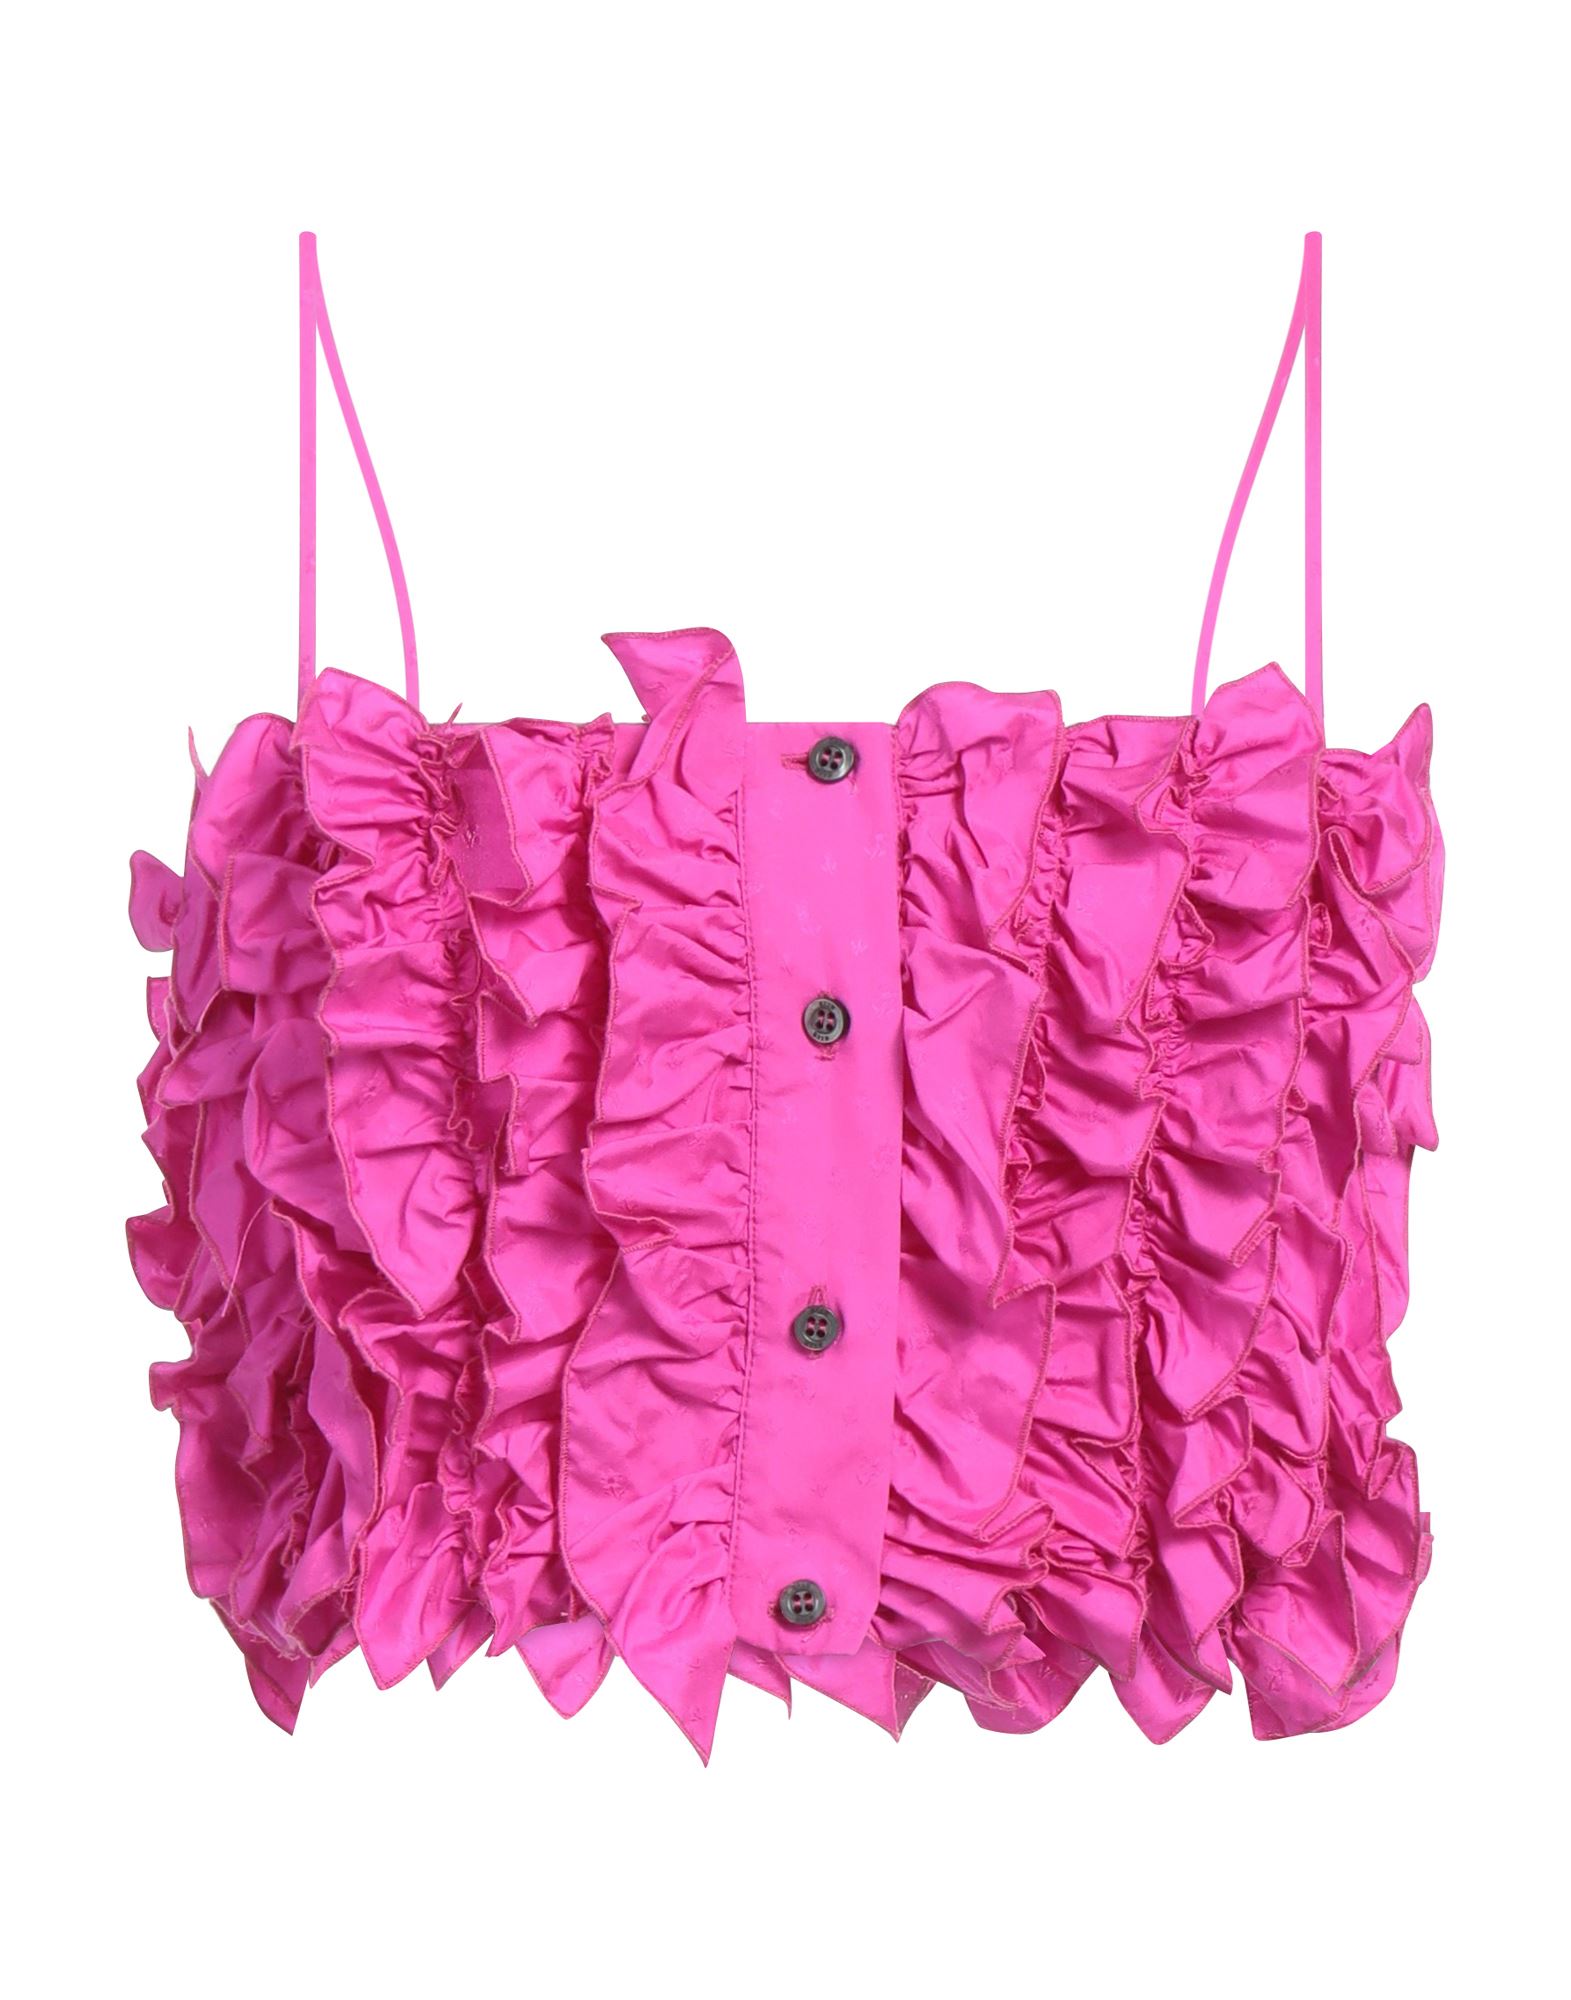 Msgm Tops In Pink